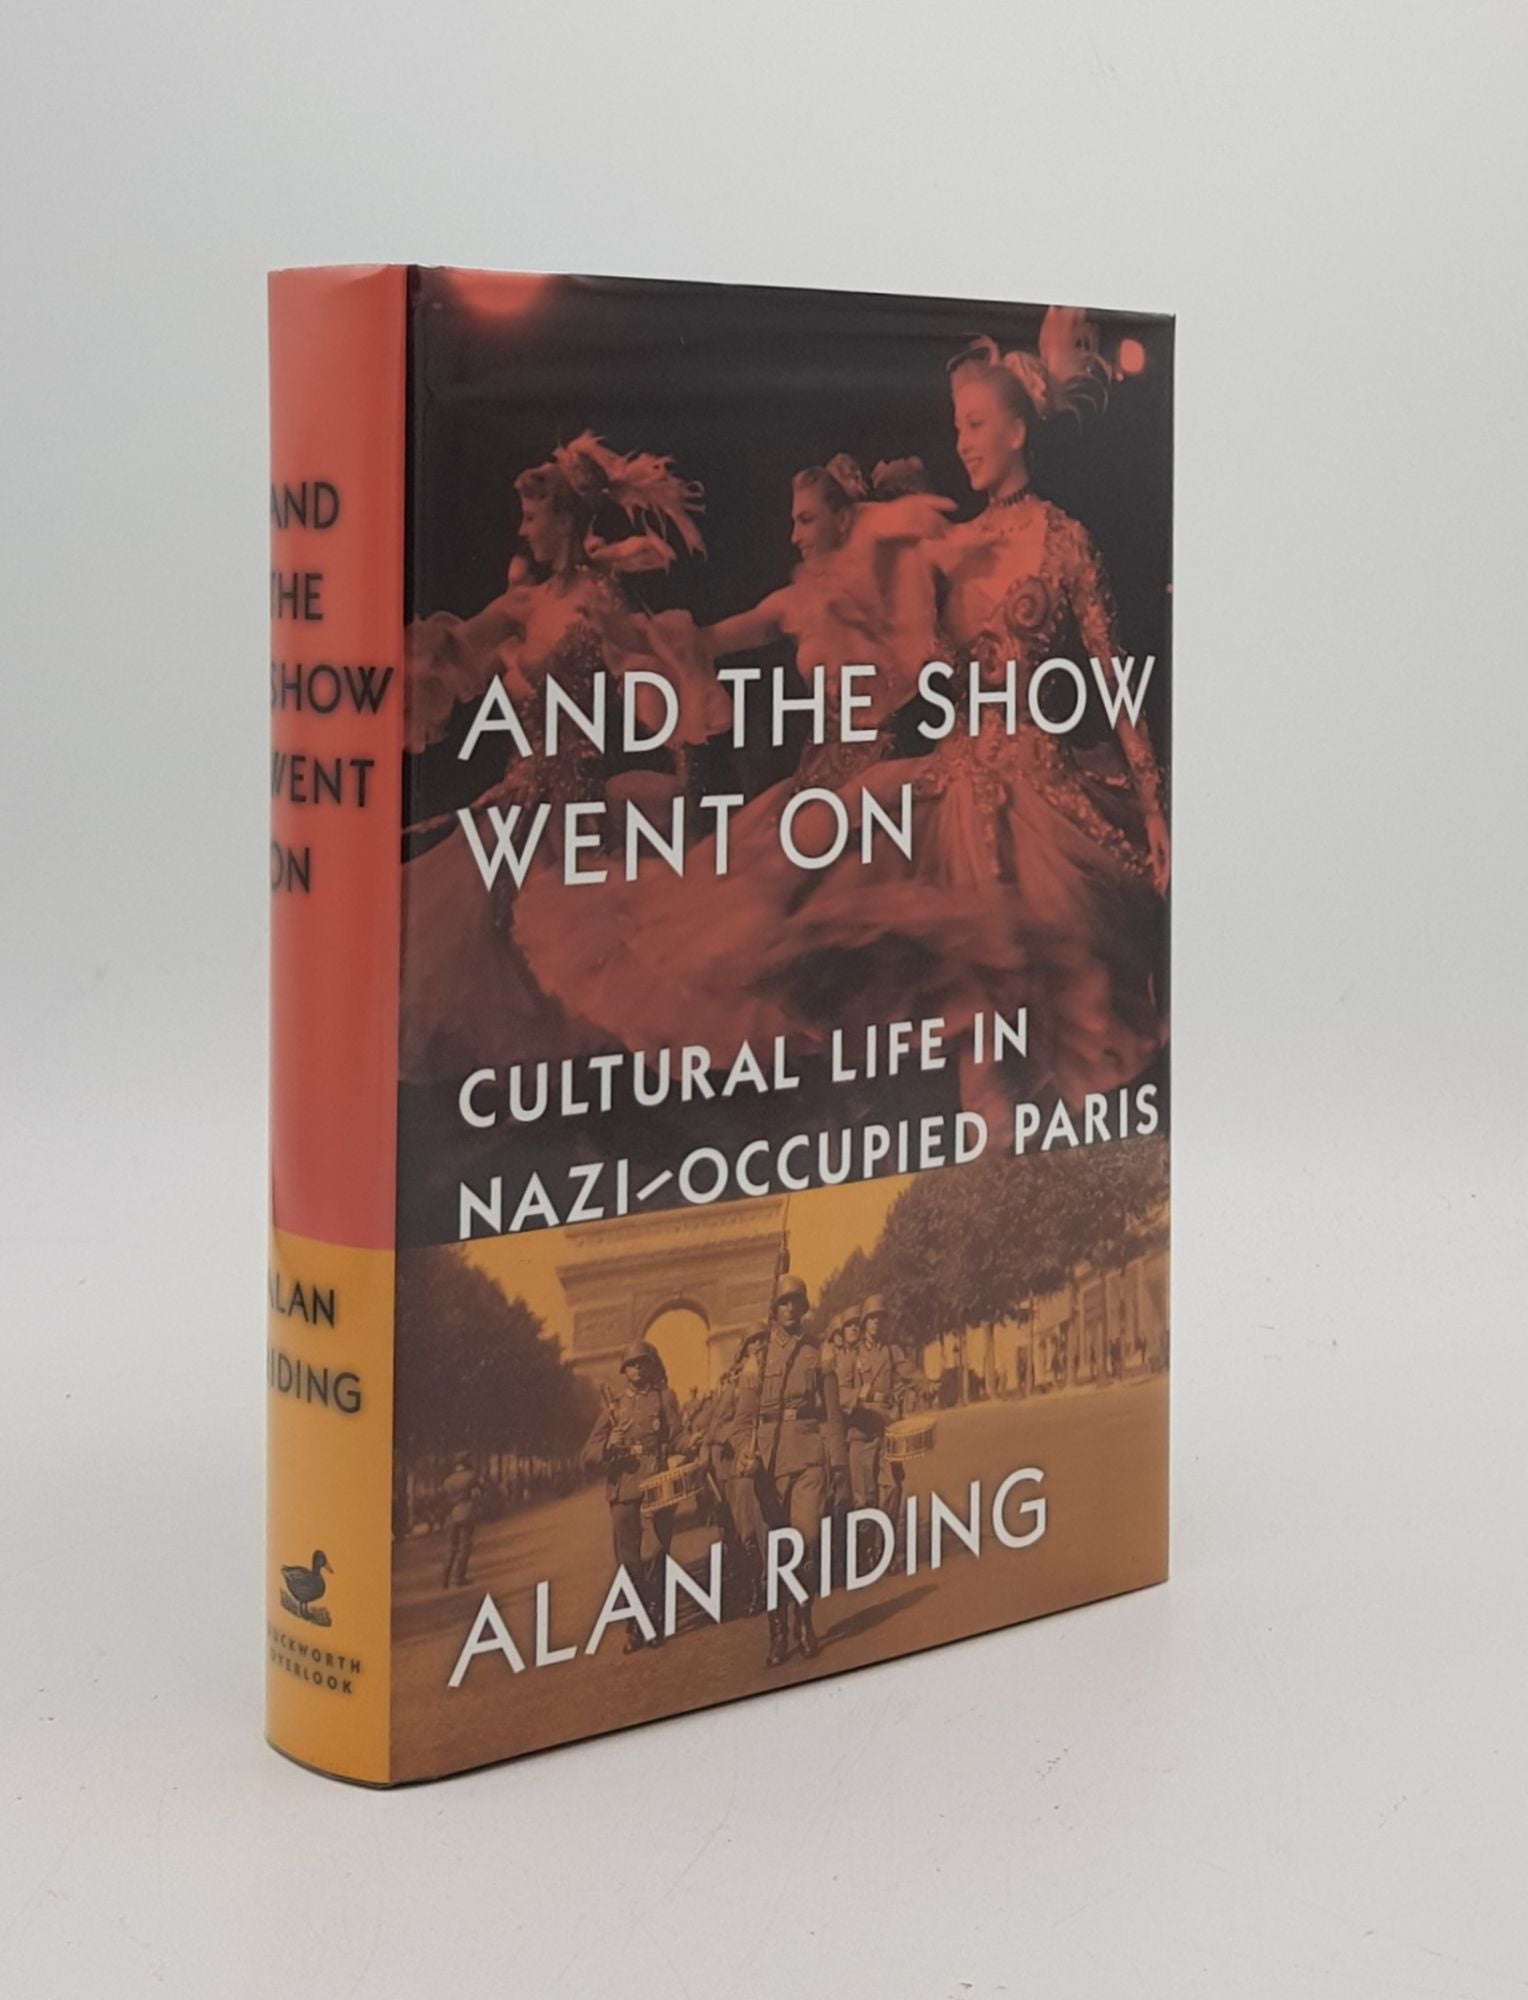 RIDING Alan - And the Show Went on Cultural Life in Nazi-Occupied Paris